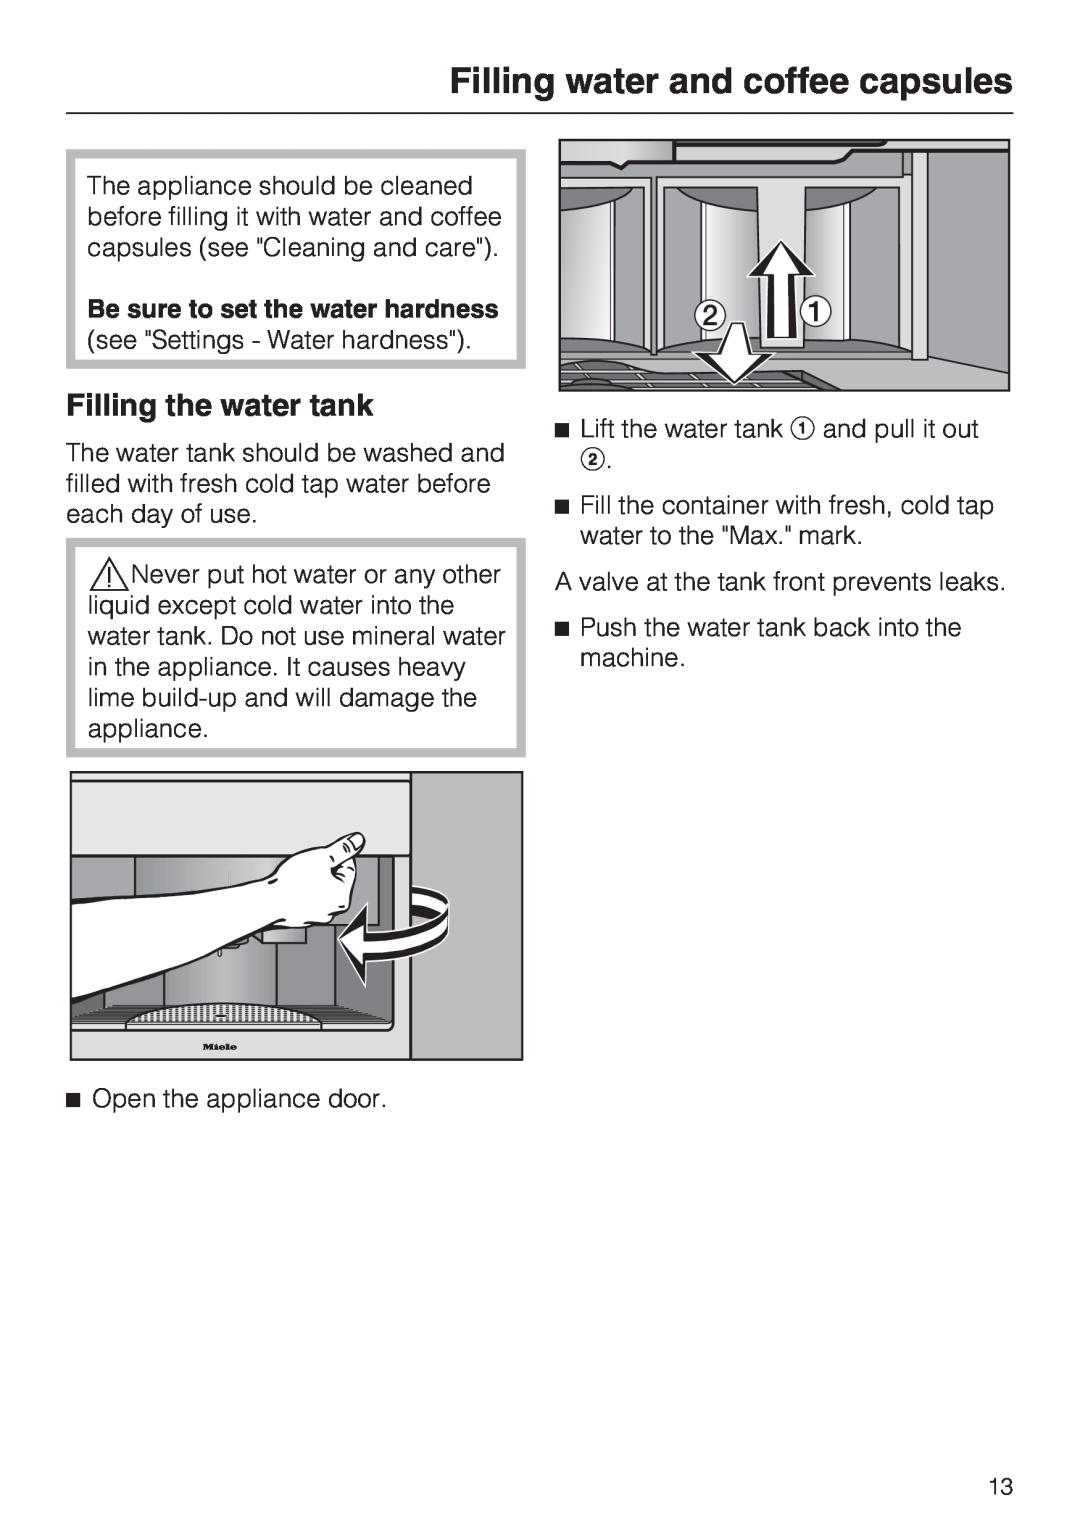 Miele CVA 2652 installation instructions Filling water and coffee capsules, Filling the water tank 